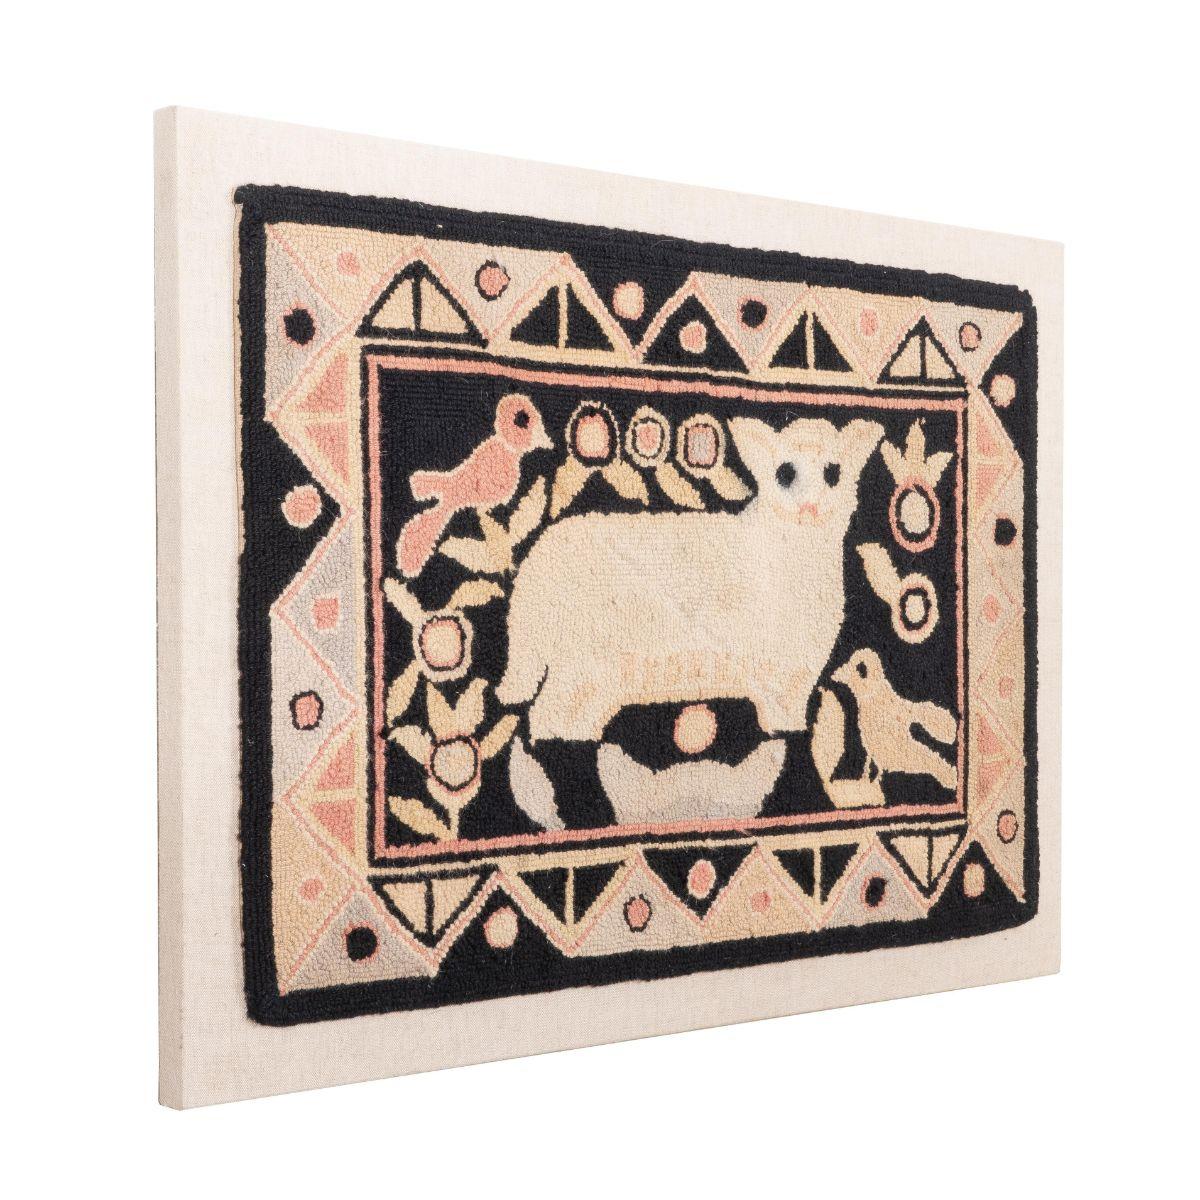 A rug of hooked wool on burlap. The design centers on a cream colored lamb on a black field populated by stylized birds and flowers within an Art Deco geometric border. Black, gray, and tan with accents of dusky peach. Mounted on linen.
American,